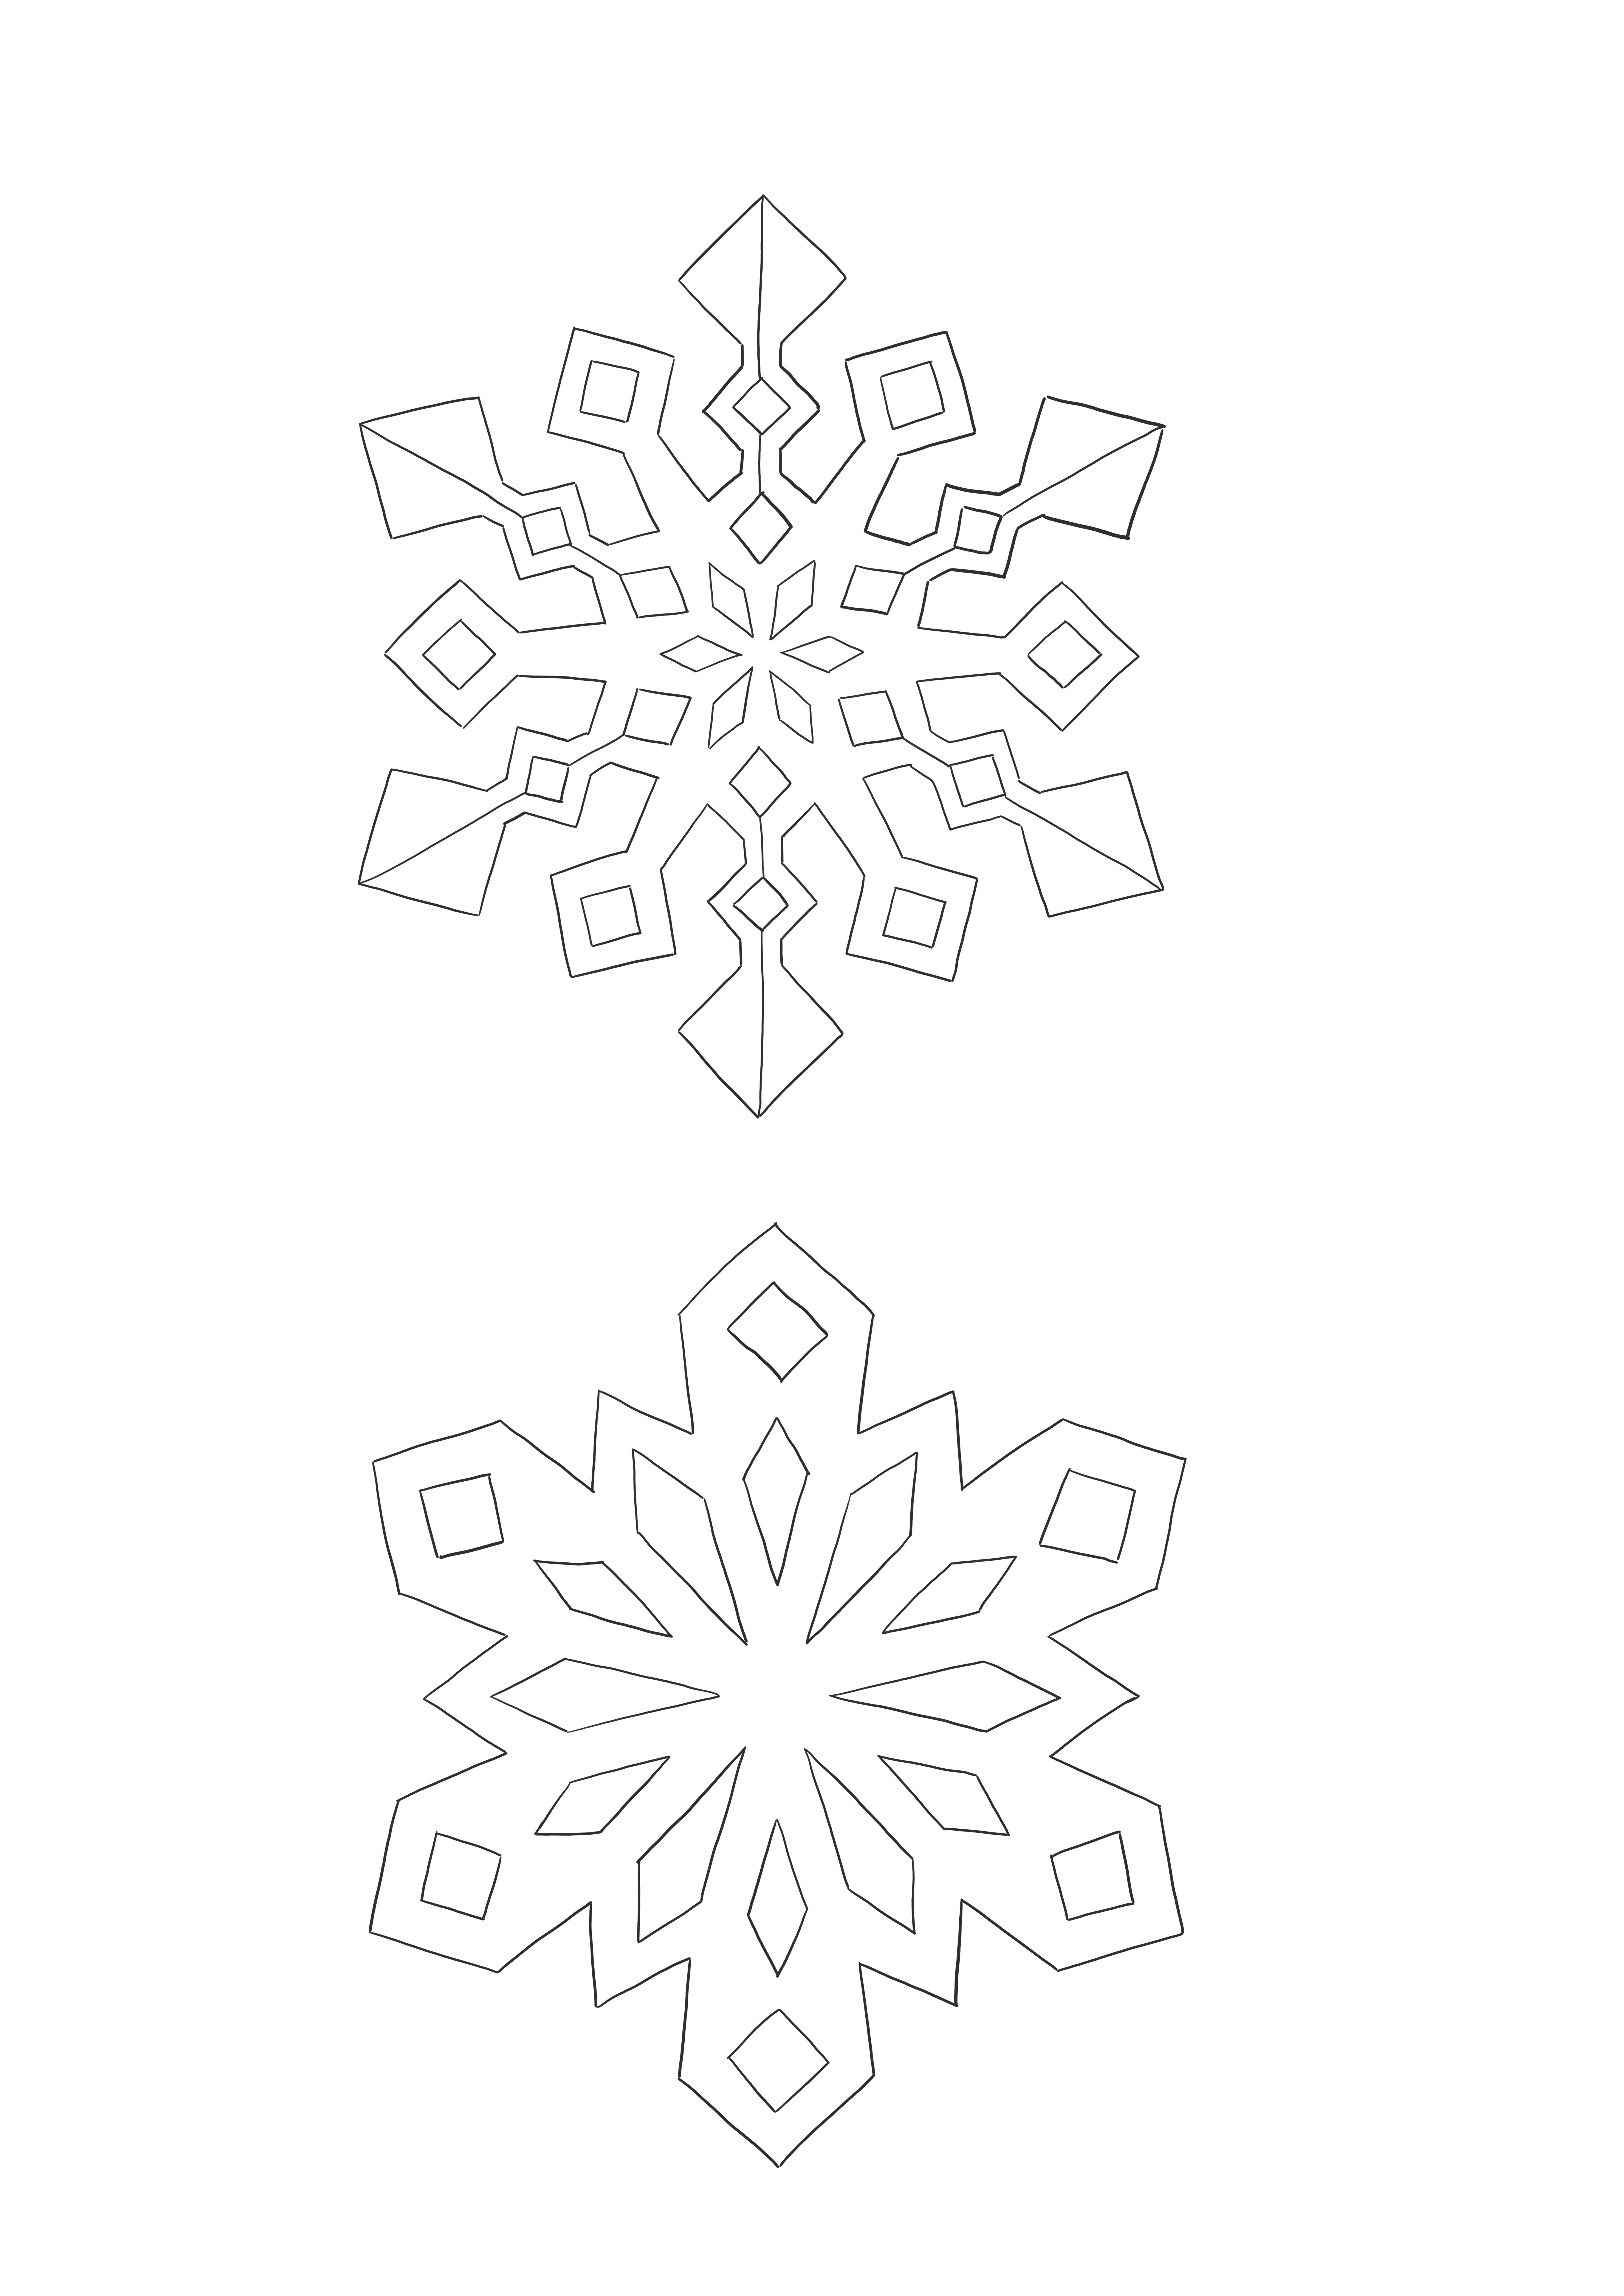 Easy to color snowflakes picture for kids of all ages